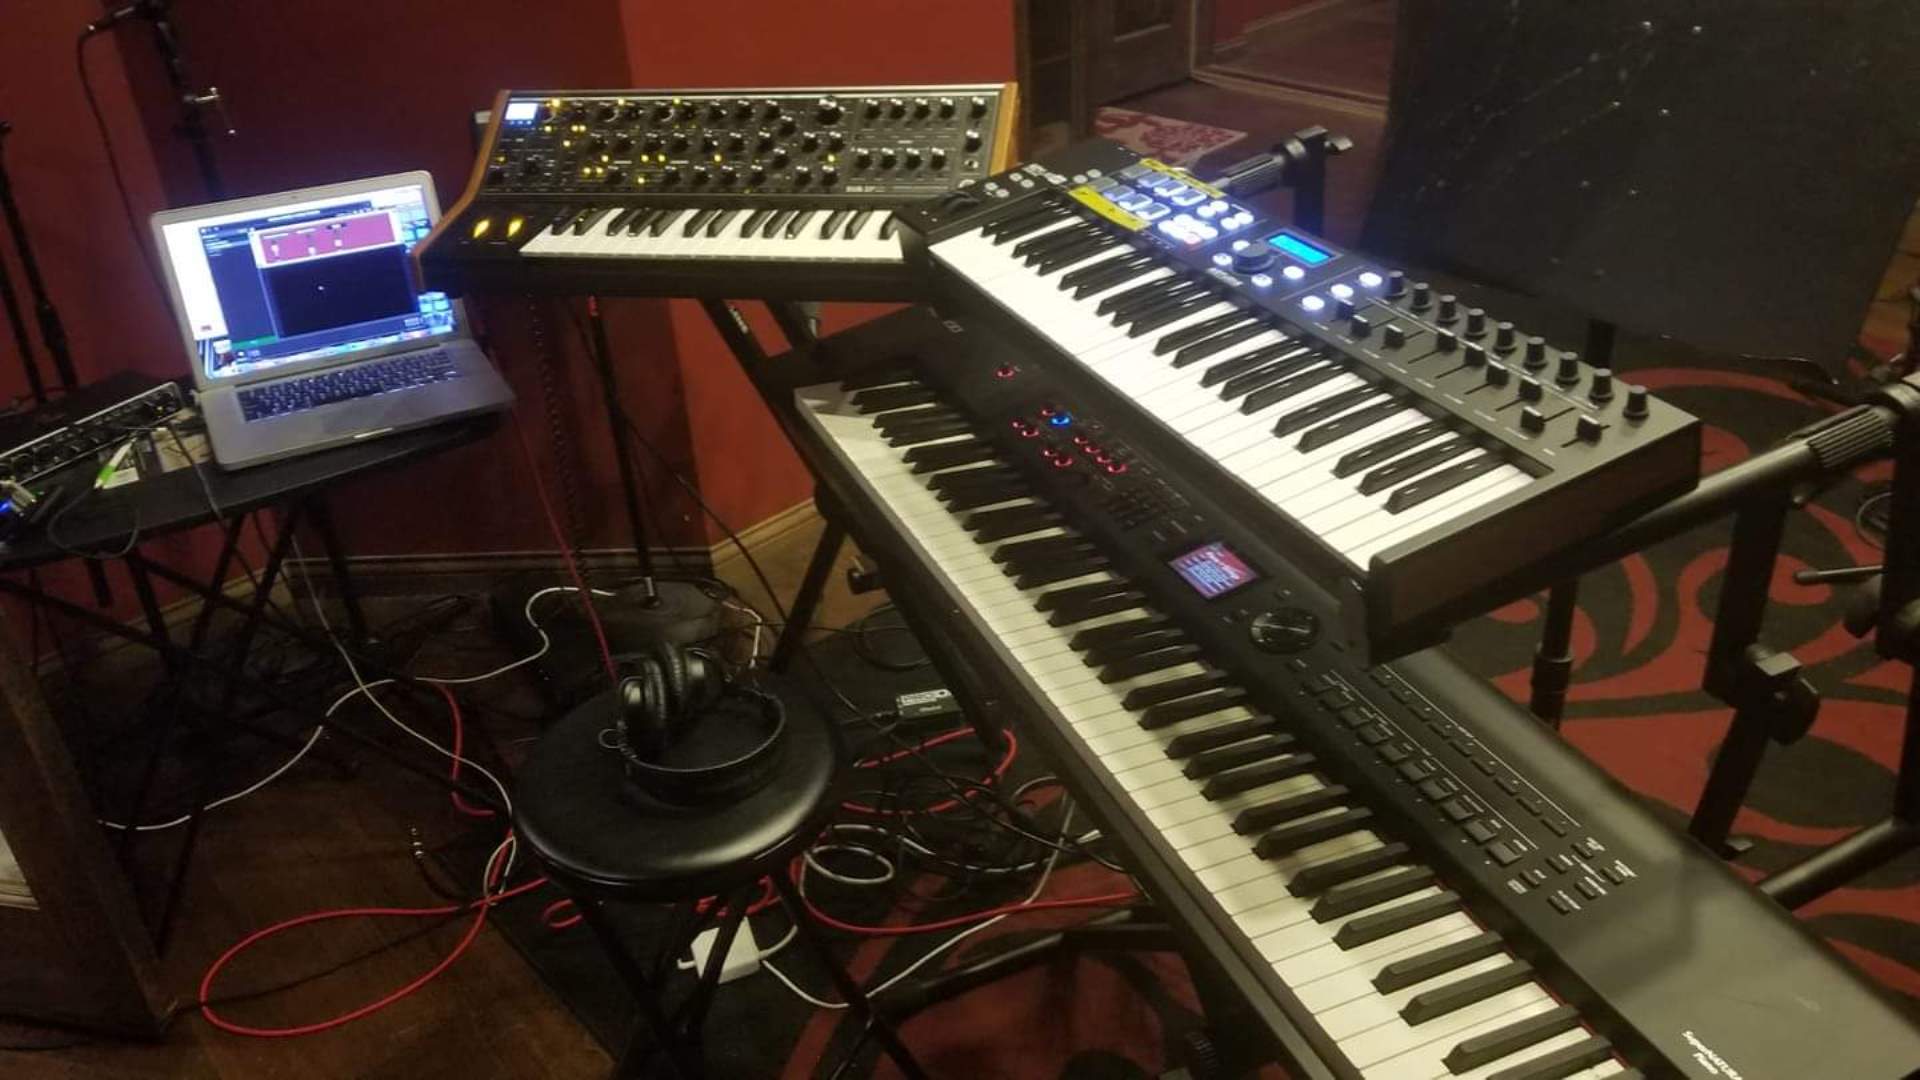 Michael Whittaker Gig Performer and rig